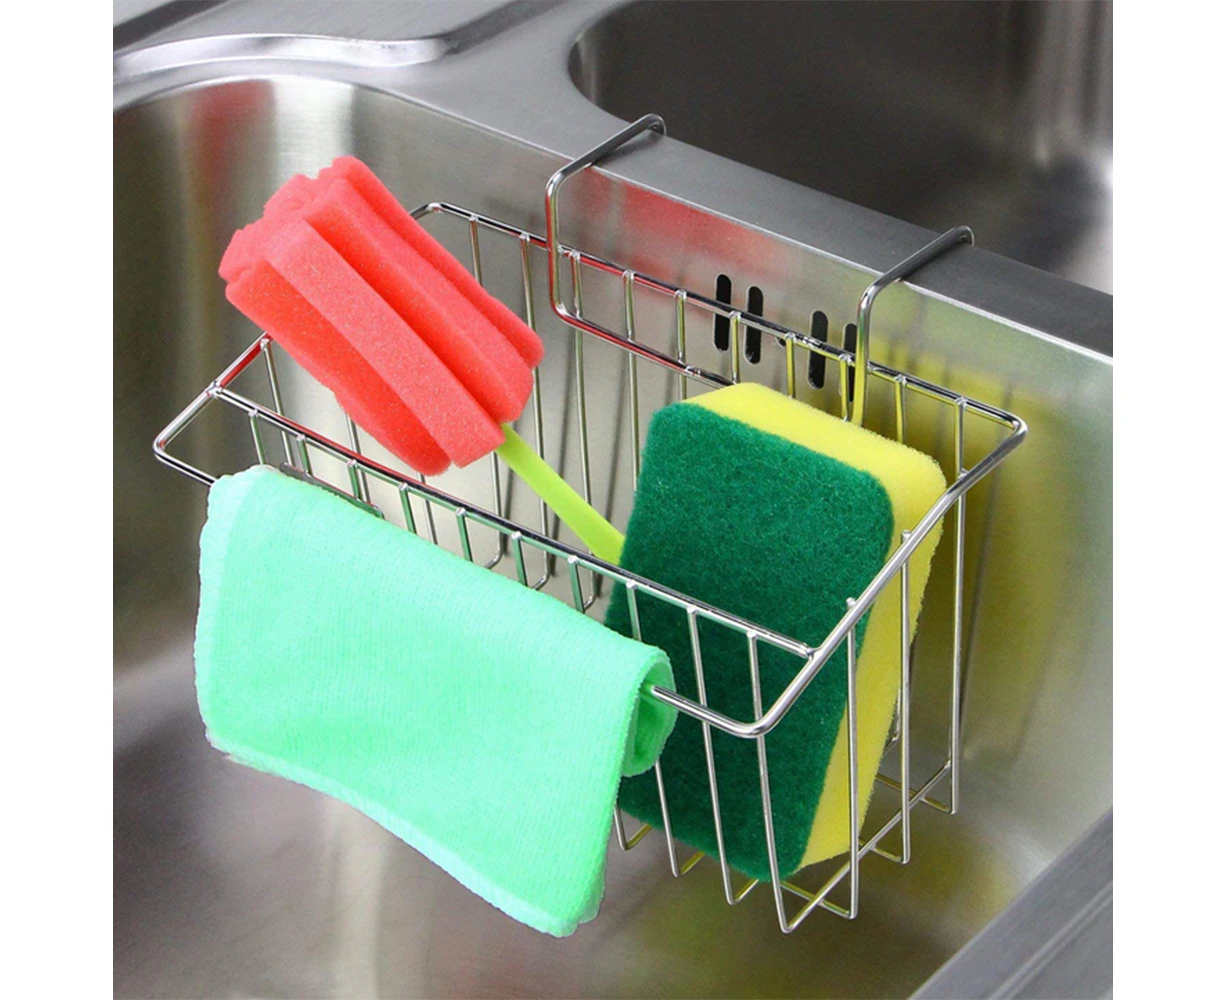 Sponge Holder for Kitchen Sink, Sink Caddy, Expandable (16.7-21.2)  Kitchen Sink Organizer with Dishcloth Towel Holder, Stainless Steel Over  Sink